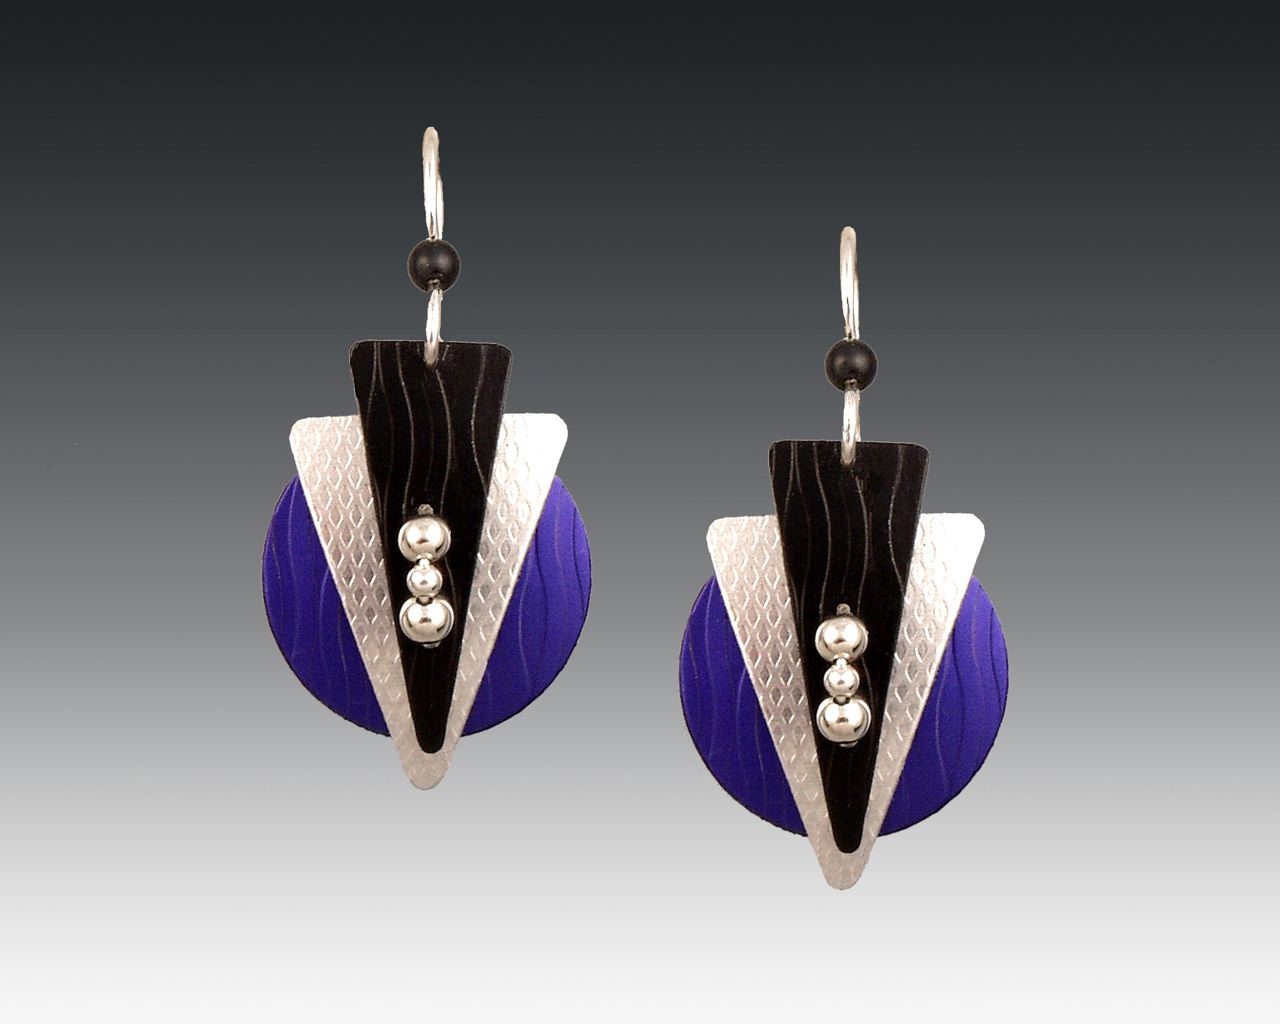 Anodized Aluminum and Sterling Silver Earrings by Mendy Marks Fine Jewelry at CustomMade.com